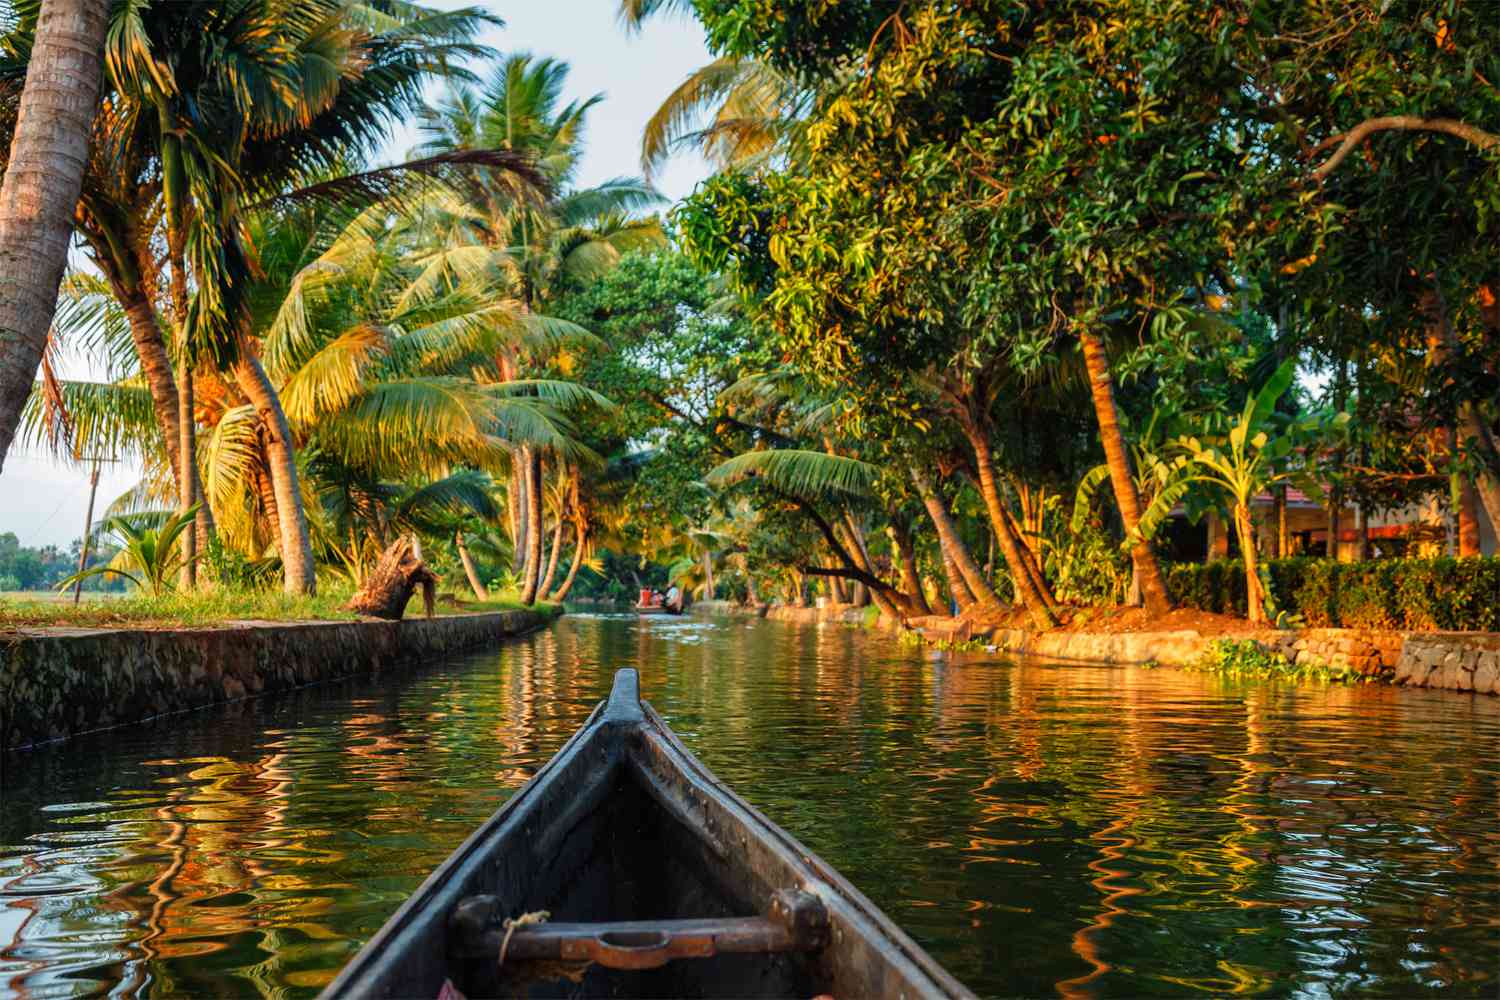 Hope and Serenity of Kumarakom Backwaters as a Pathway for Resolving Differences: Insights from India's G20 Sherpa, Amitabh Kant